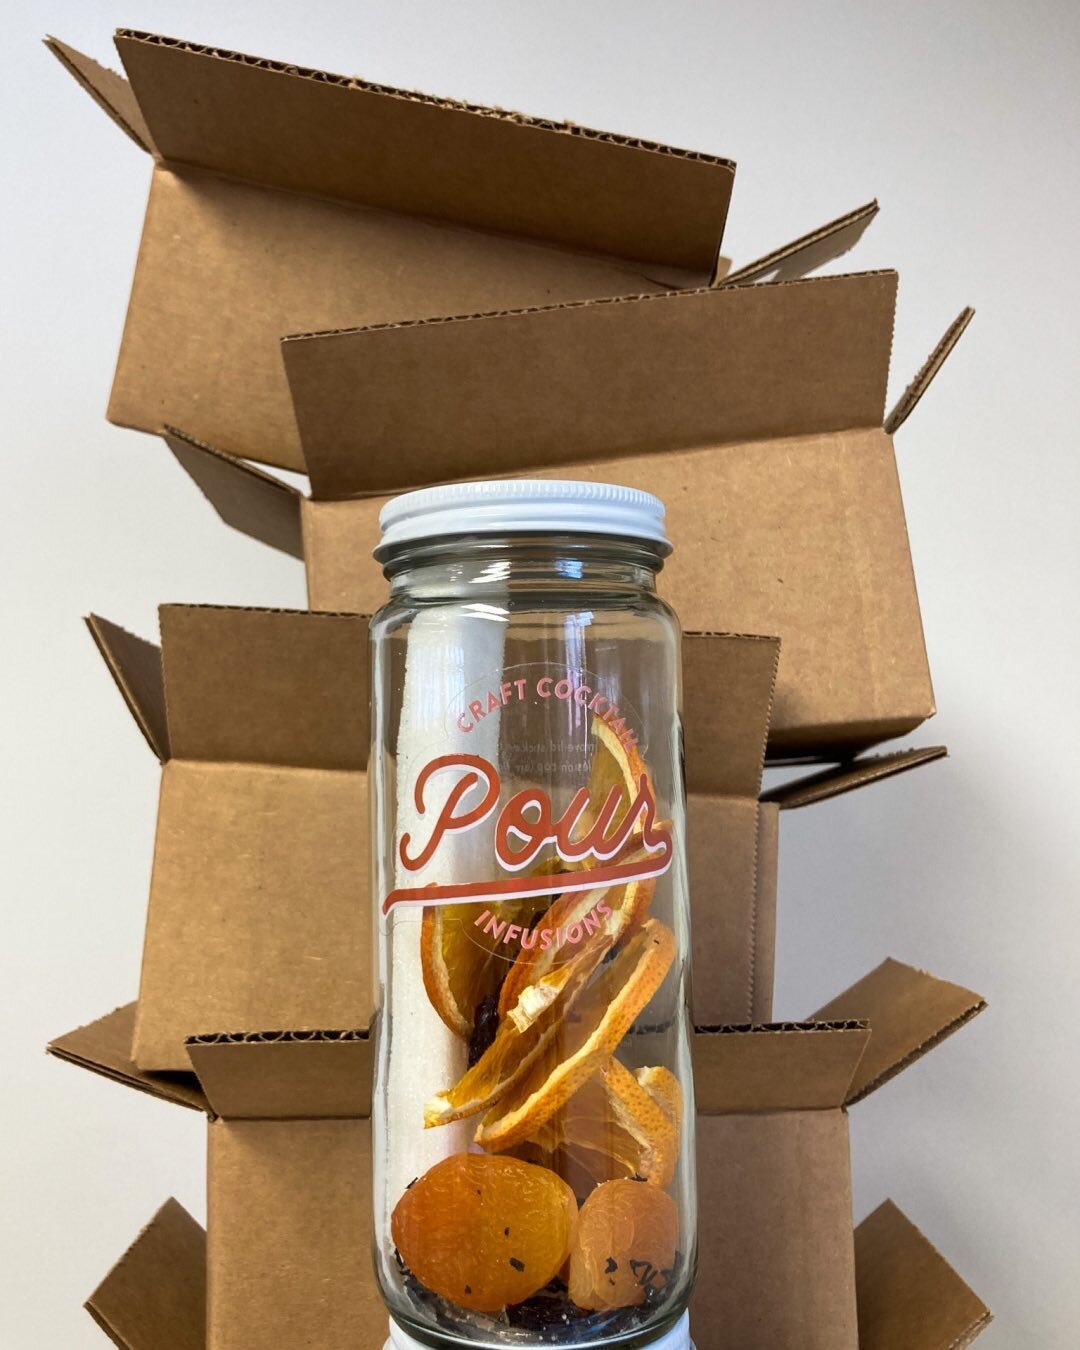 Virtual team happy hours are a must, especially with remote work becoming more &amp; more popular! 

Pour Craft Cocktail Infusion kits are the perfect addition that your co-workers will be sure to love! 

Zero-proof approved 💯